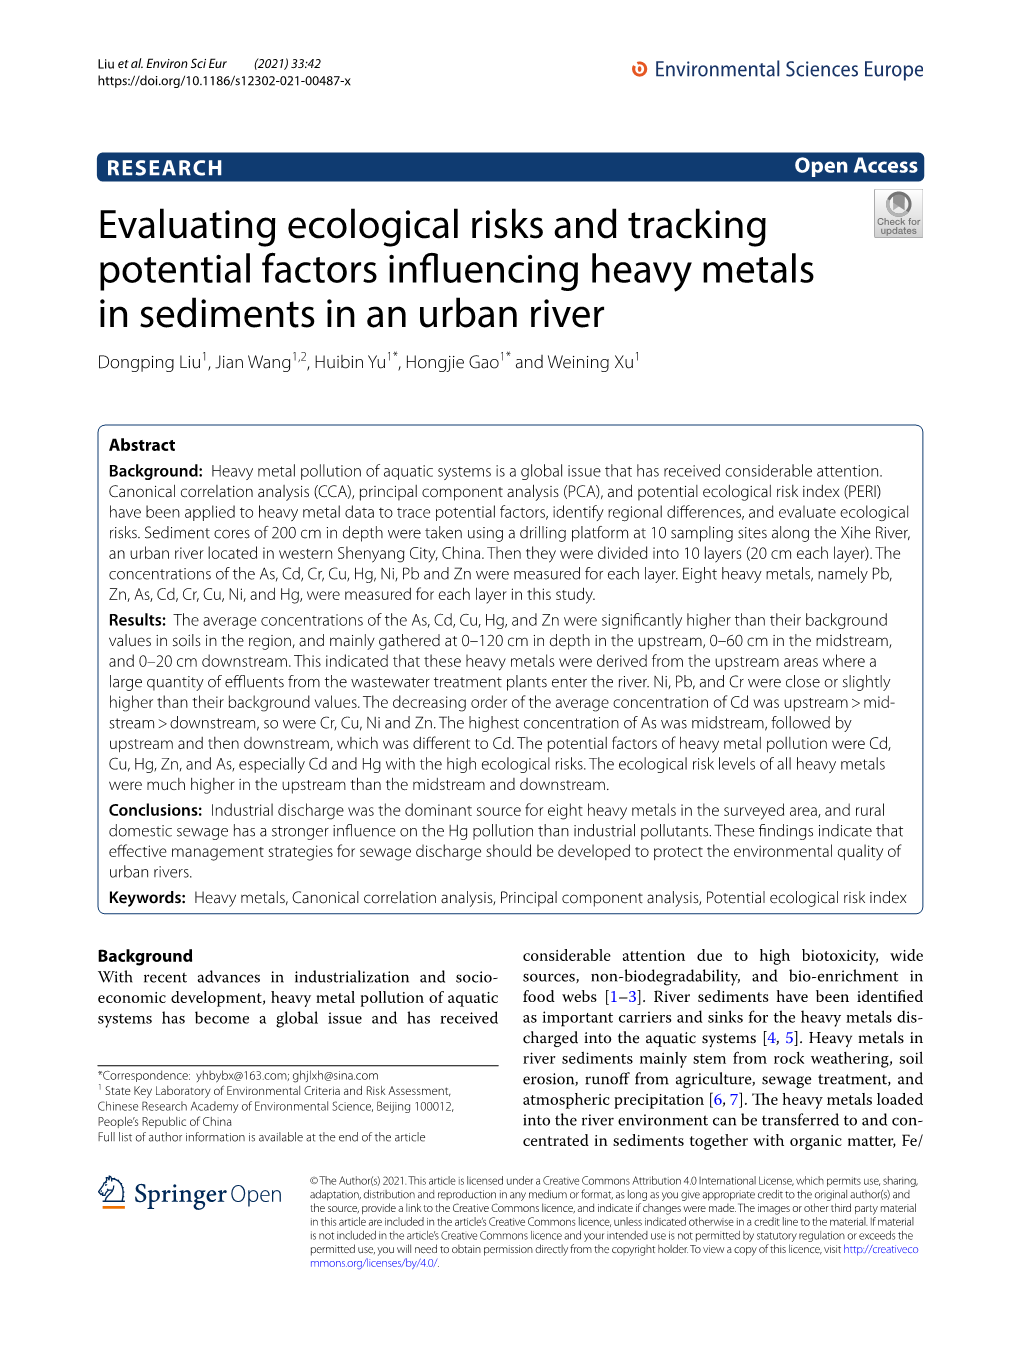 Evaluating Ecological Risks and Tracking Potential Factors Influencing